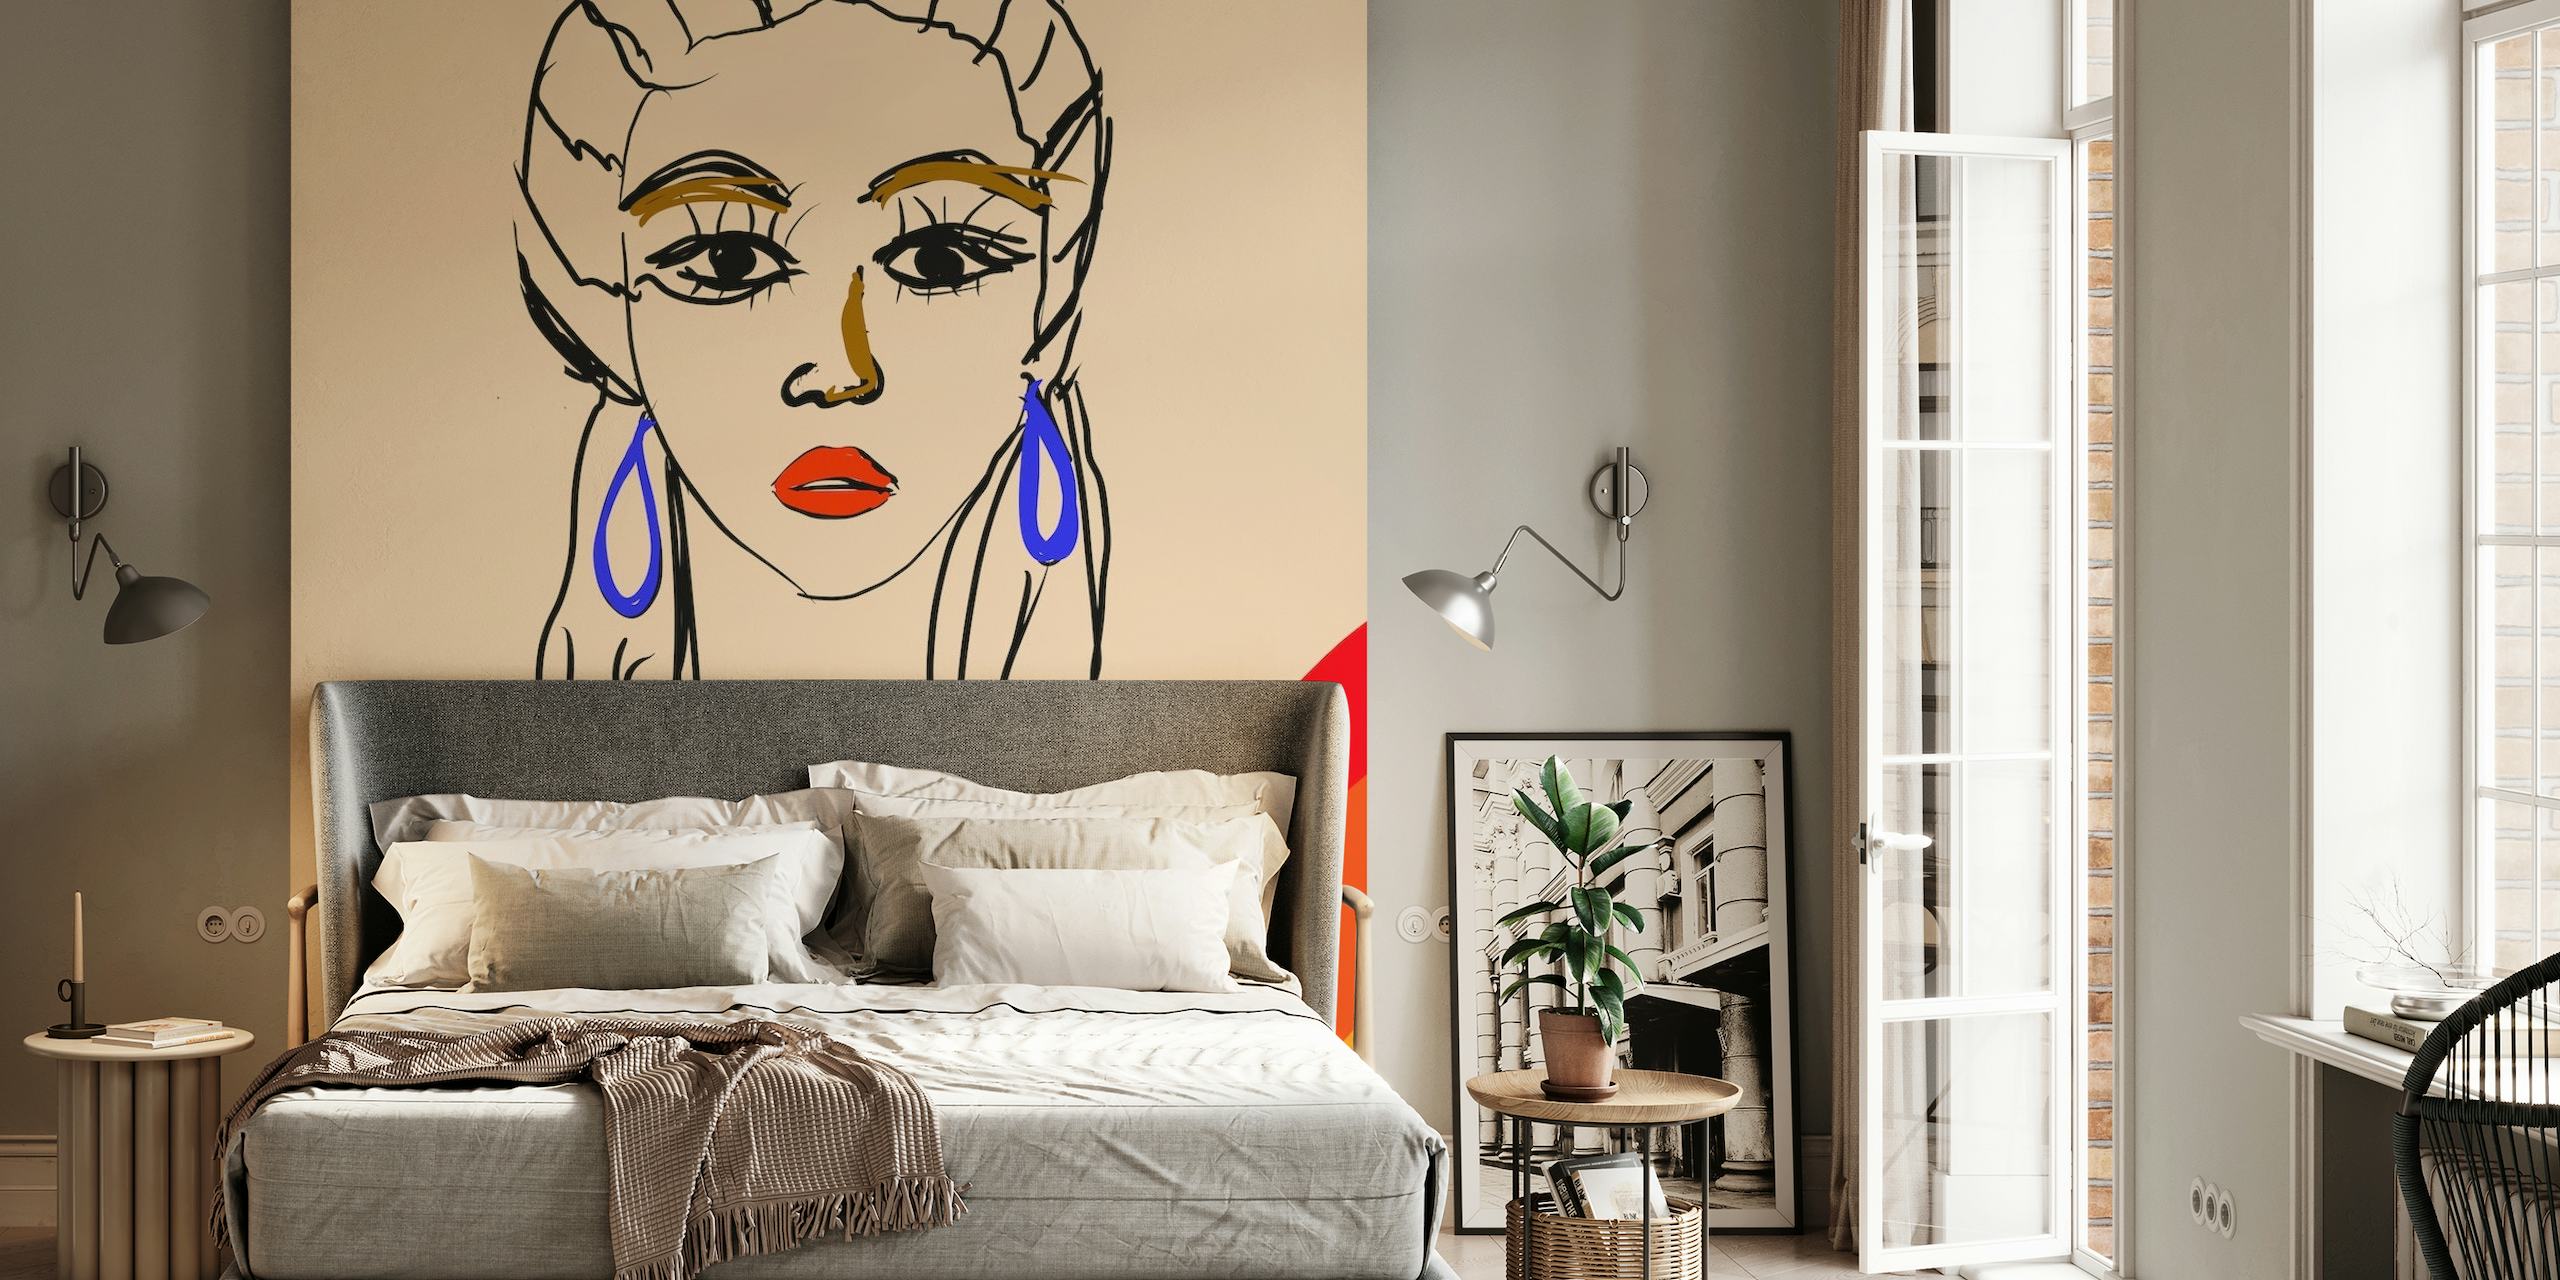 Illustrative wall mural of a line-drawn woman with blue earrings and orange accent